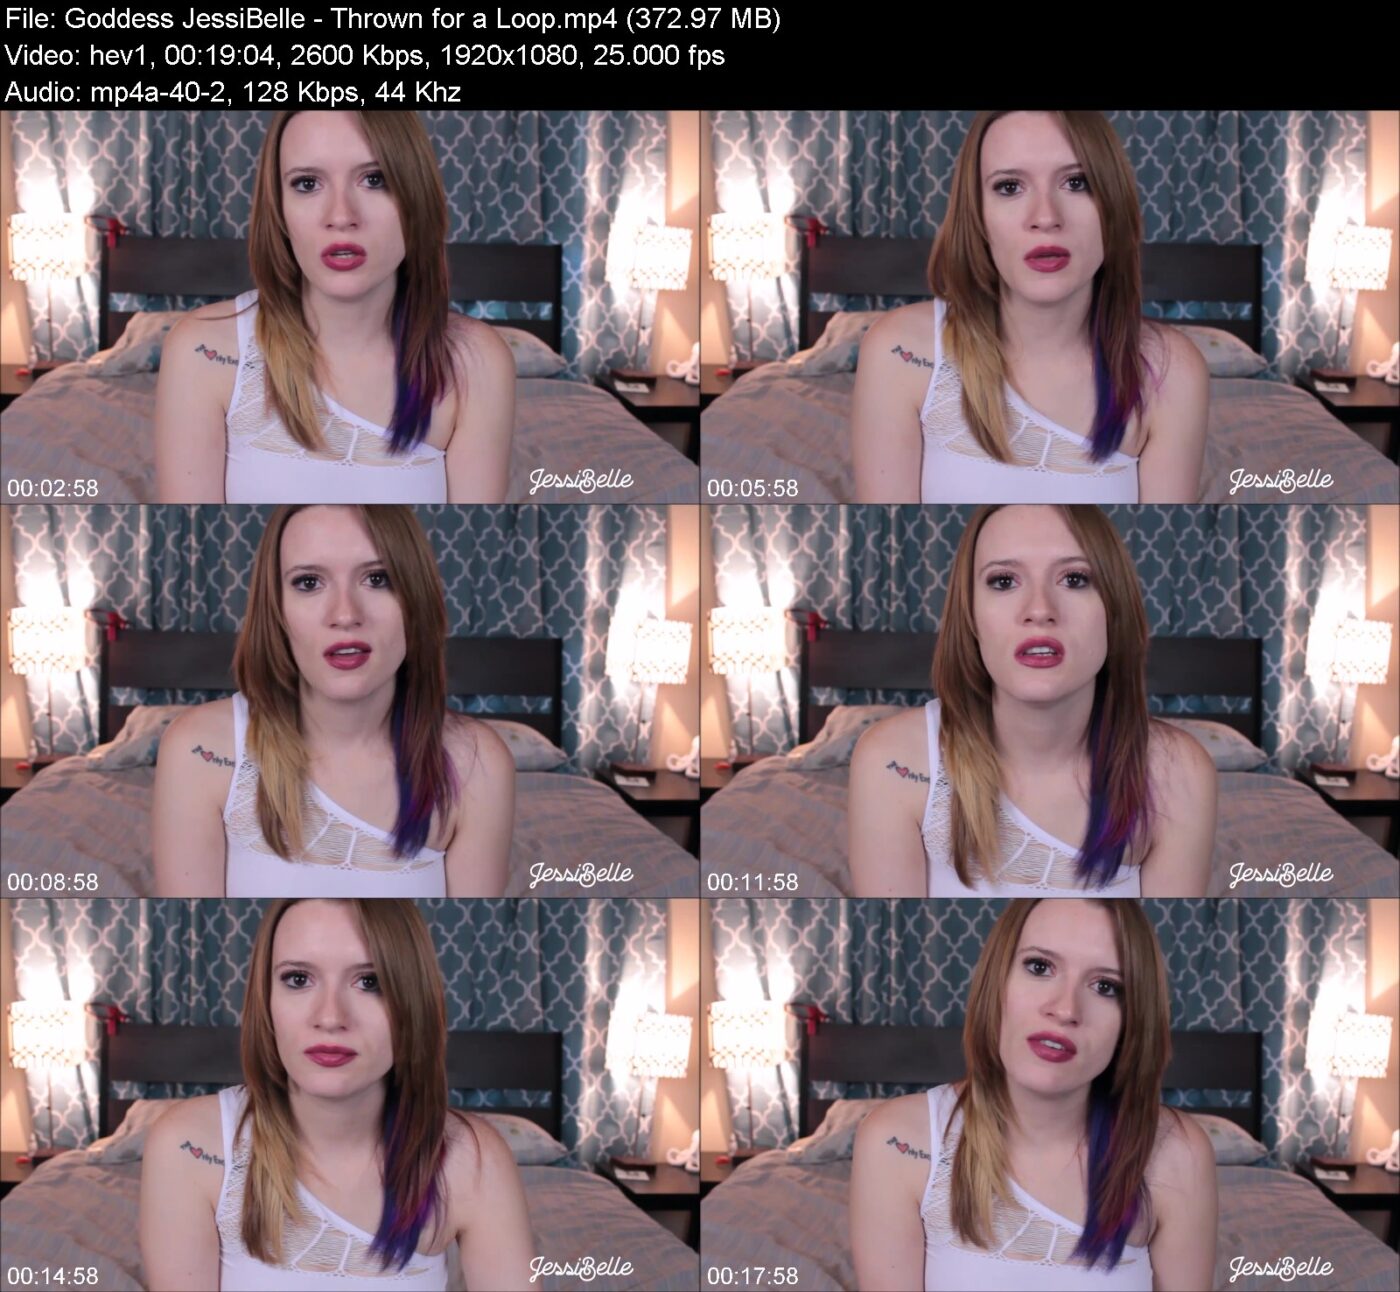 Actress: Goddess JessiBelle. Title and Studio: Thrown for a Loop